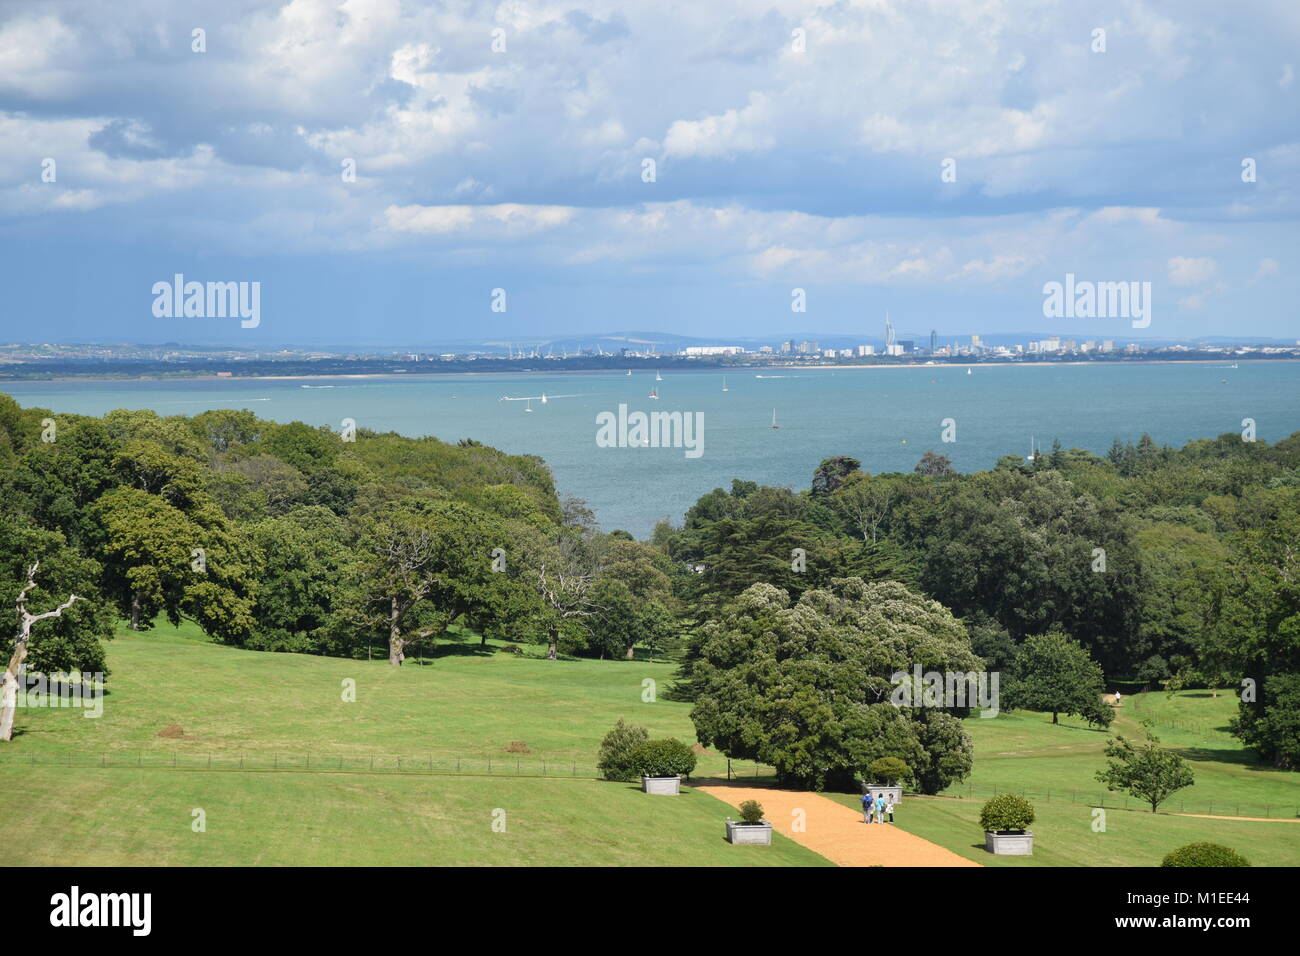 VIEW IN AUGUST FROM OSBORNE HOUSE, QUEEN VICTORIA'S RESIDENCE IN EAST COWES, ISLE OF WIGHT, UK Stock Photo